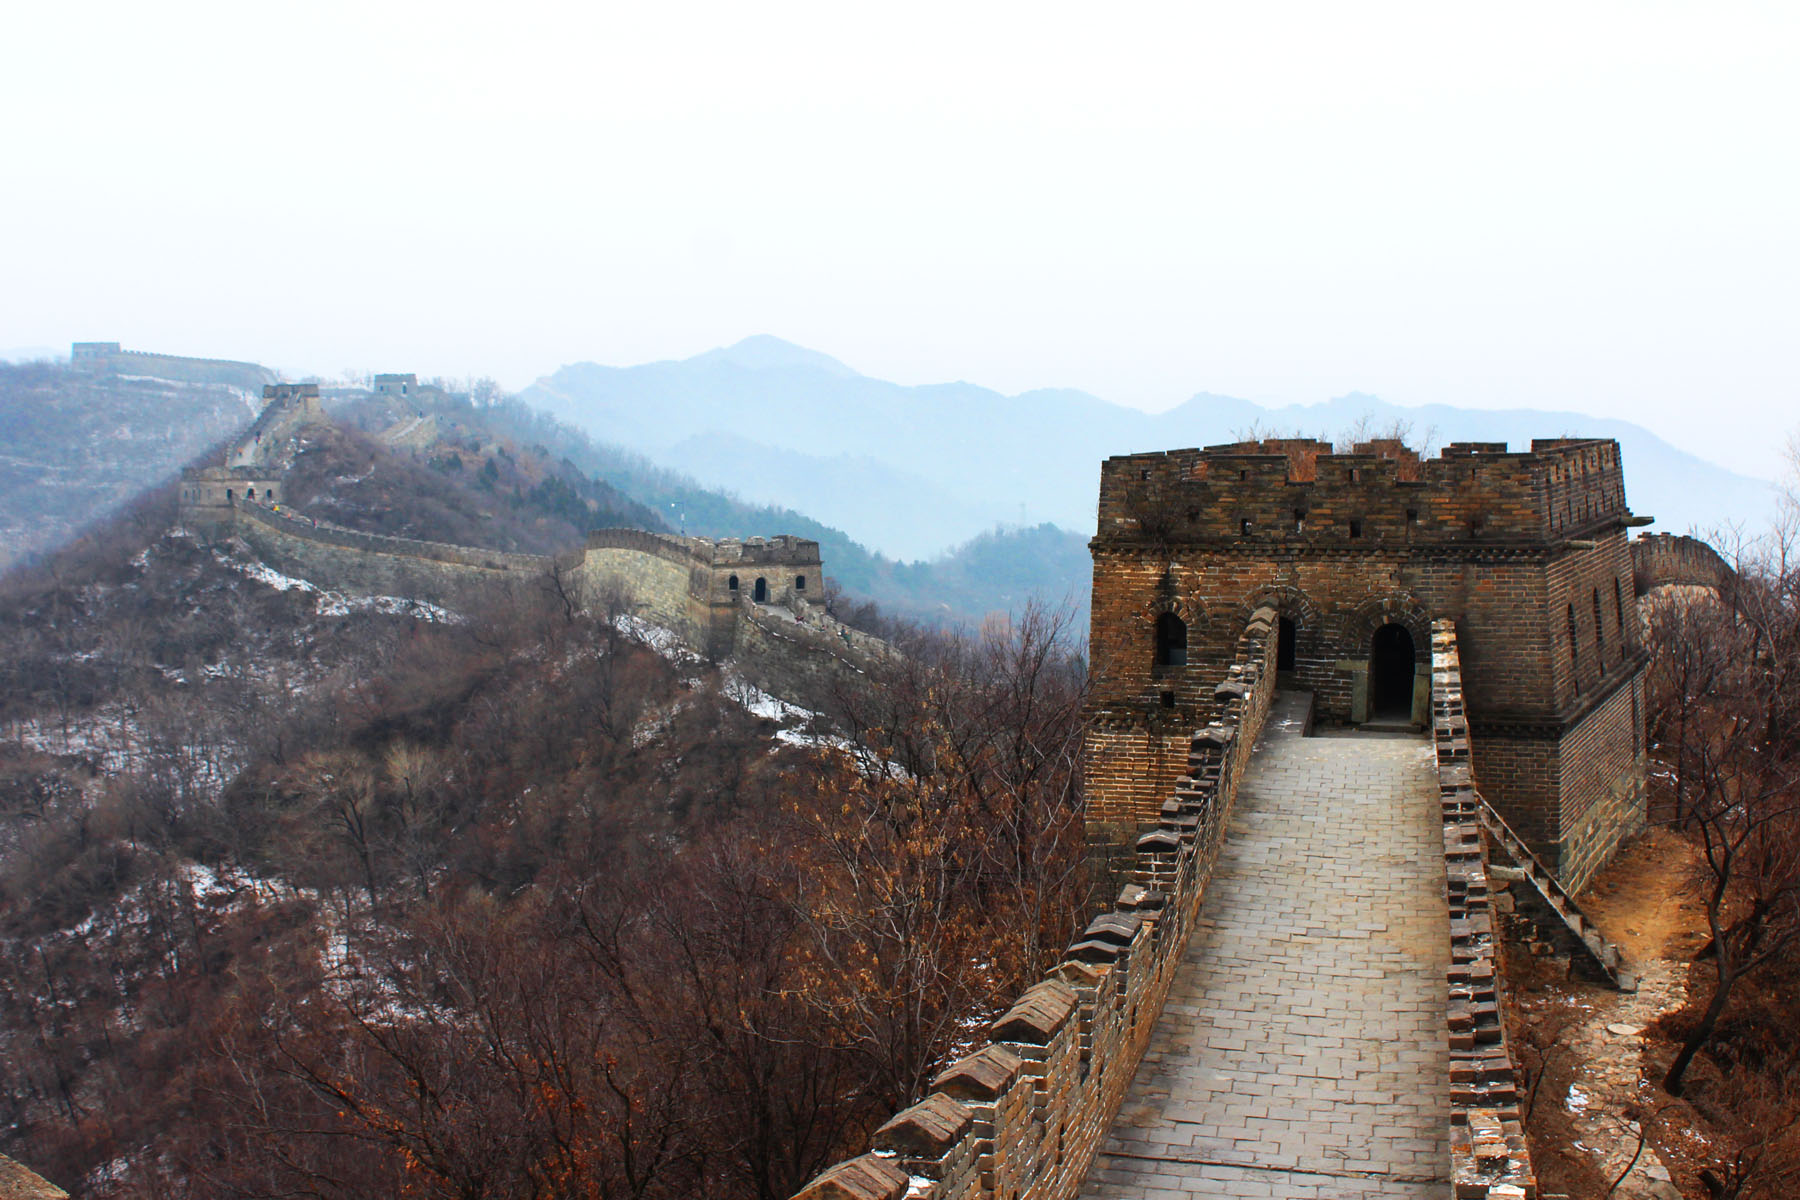 The Great Wall of China is one of the Seven Wonders of the World and should feature on EVERYONE's bucket list!